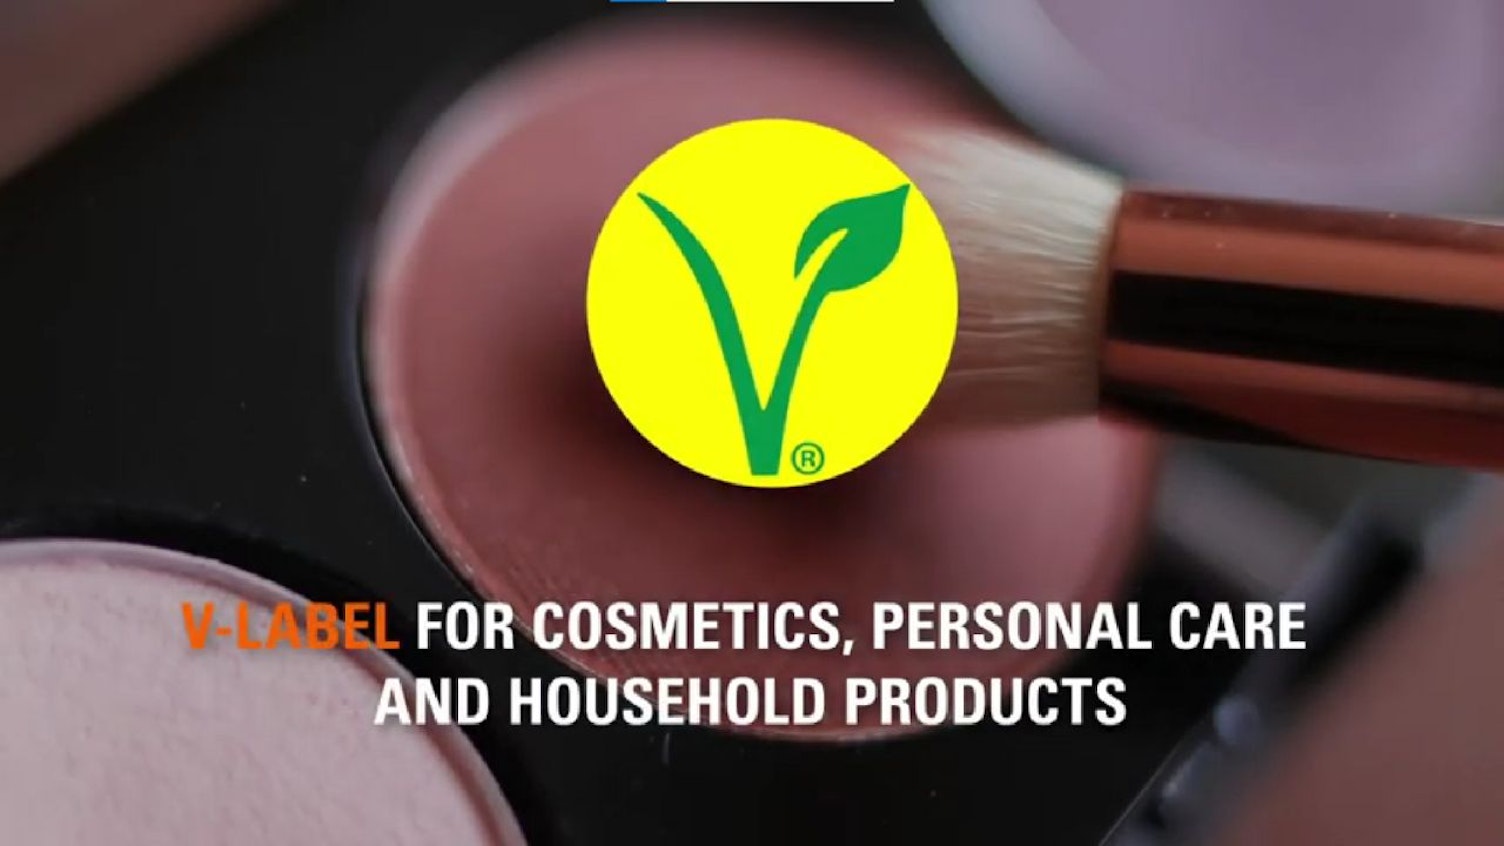 V Label for Cosmetics Personal Care and Household Products